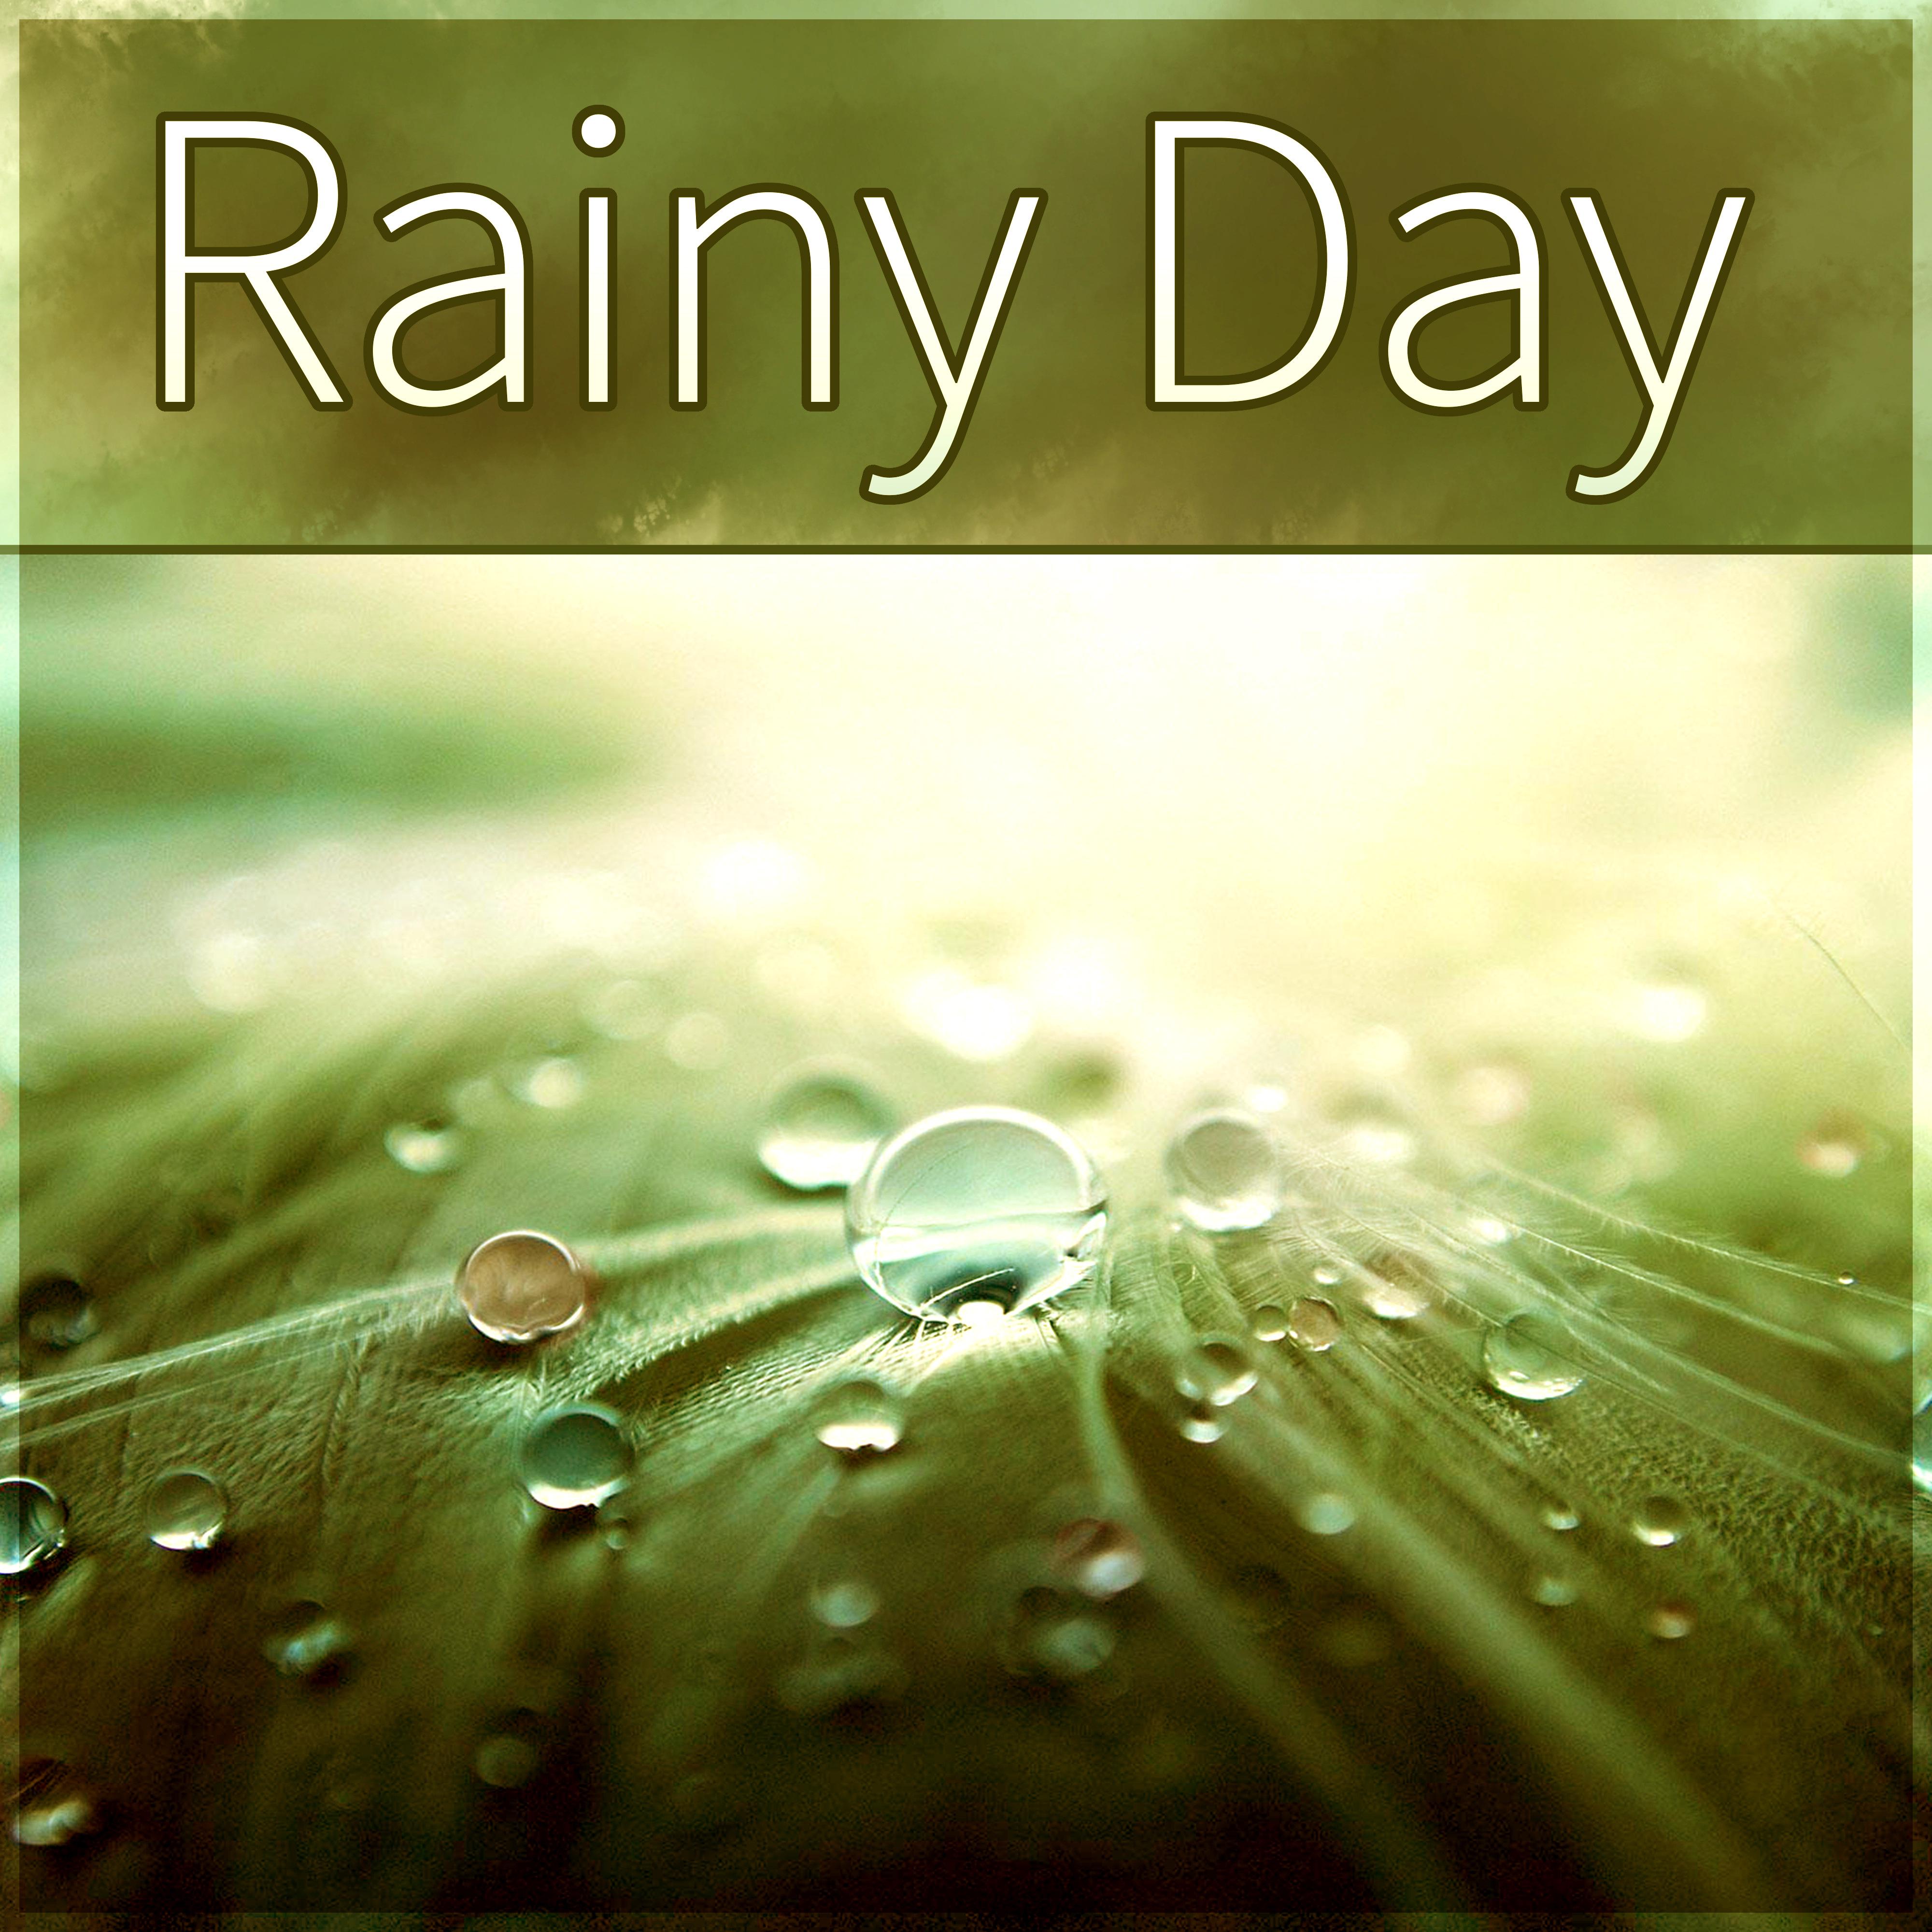 Rainy Day - Music for Restful Sleep, Good Time with New Age, Nature Sounds with Relaxing Piano Music, Sensual Massage Music for Aromatherapy, Ocean Waves & Rain Sounds, Serenity Spa